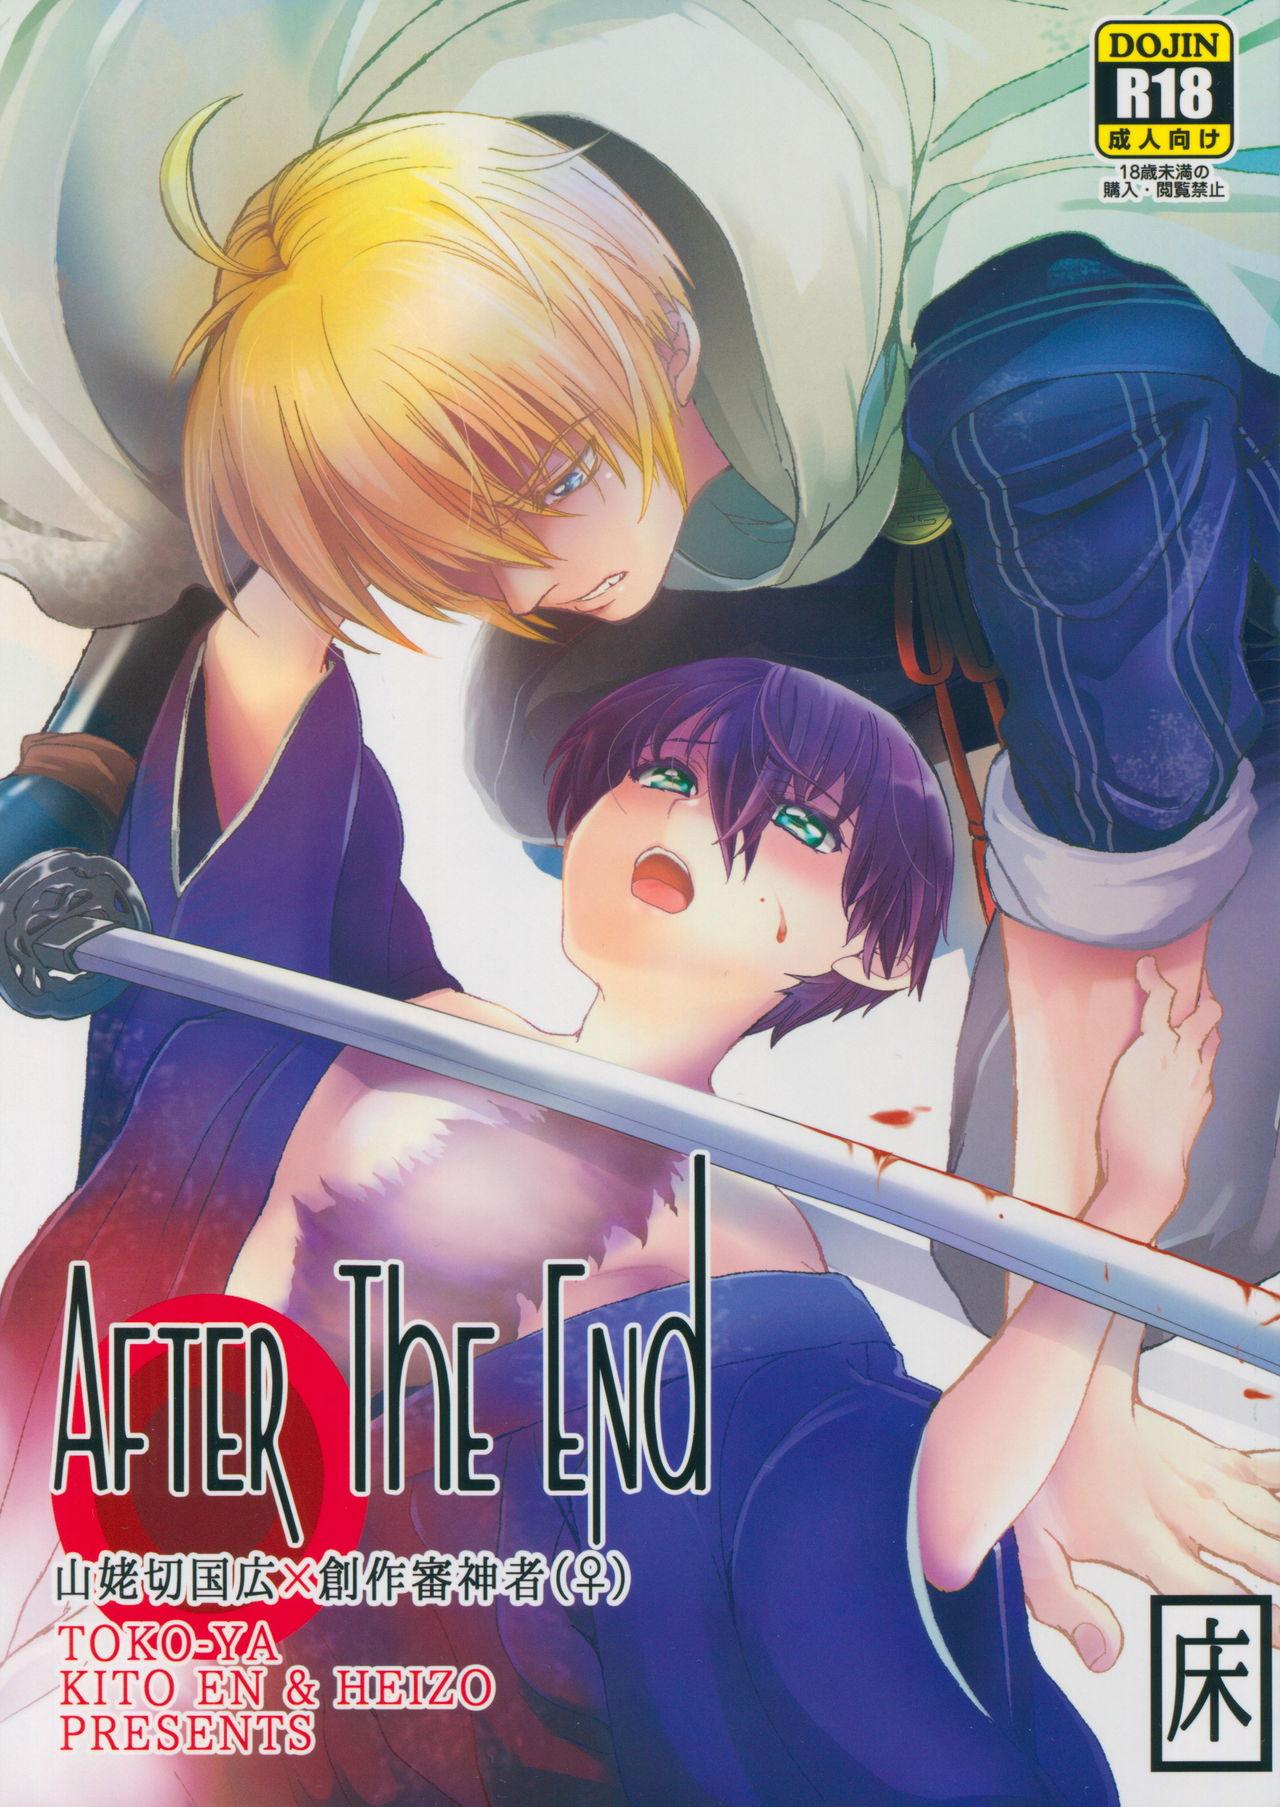 AFTER THE END 0